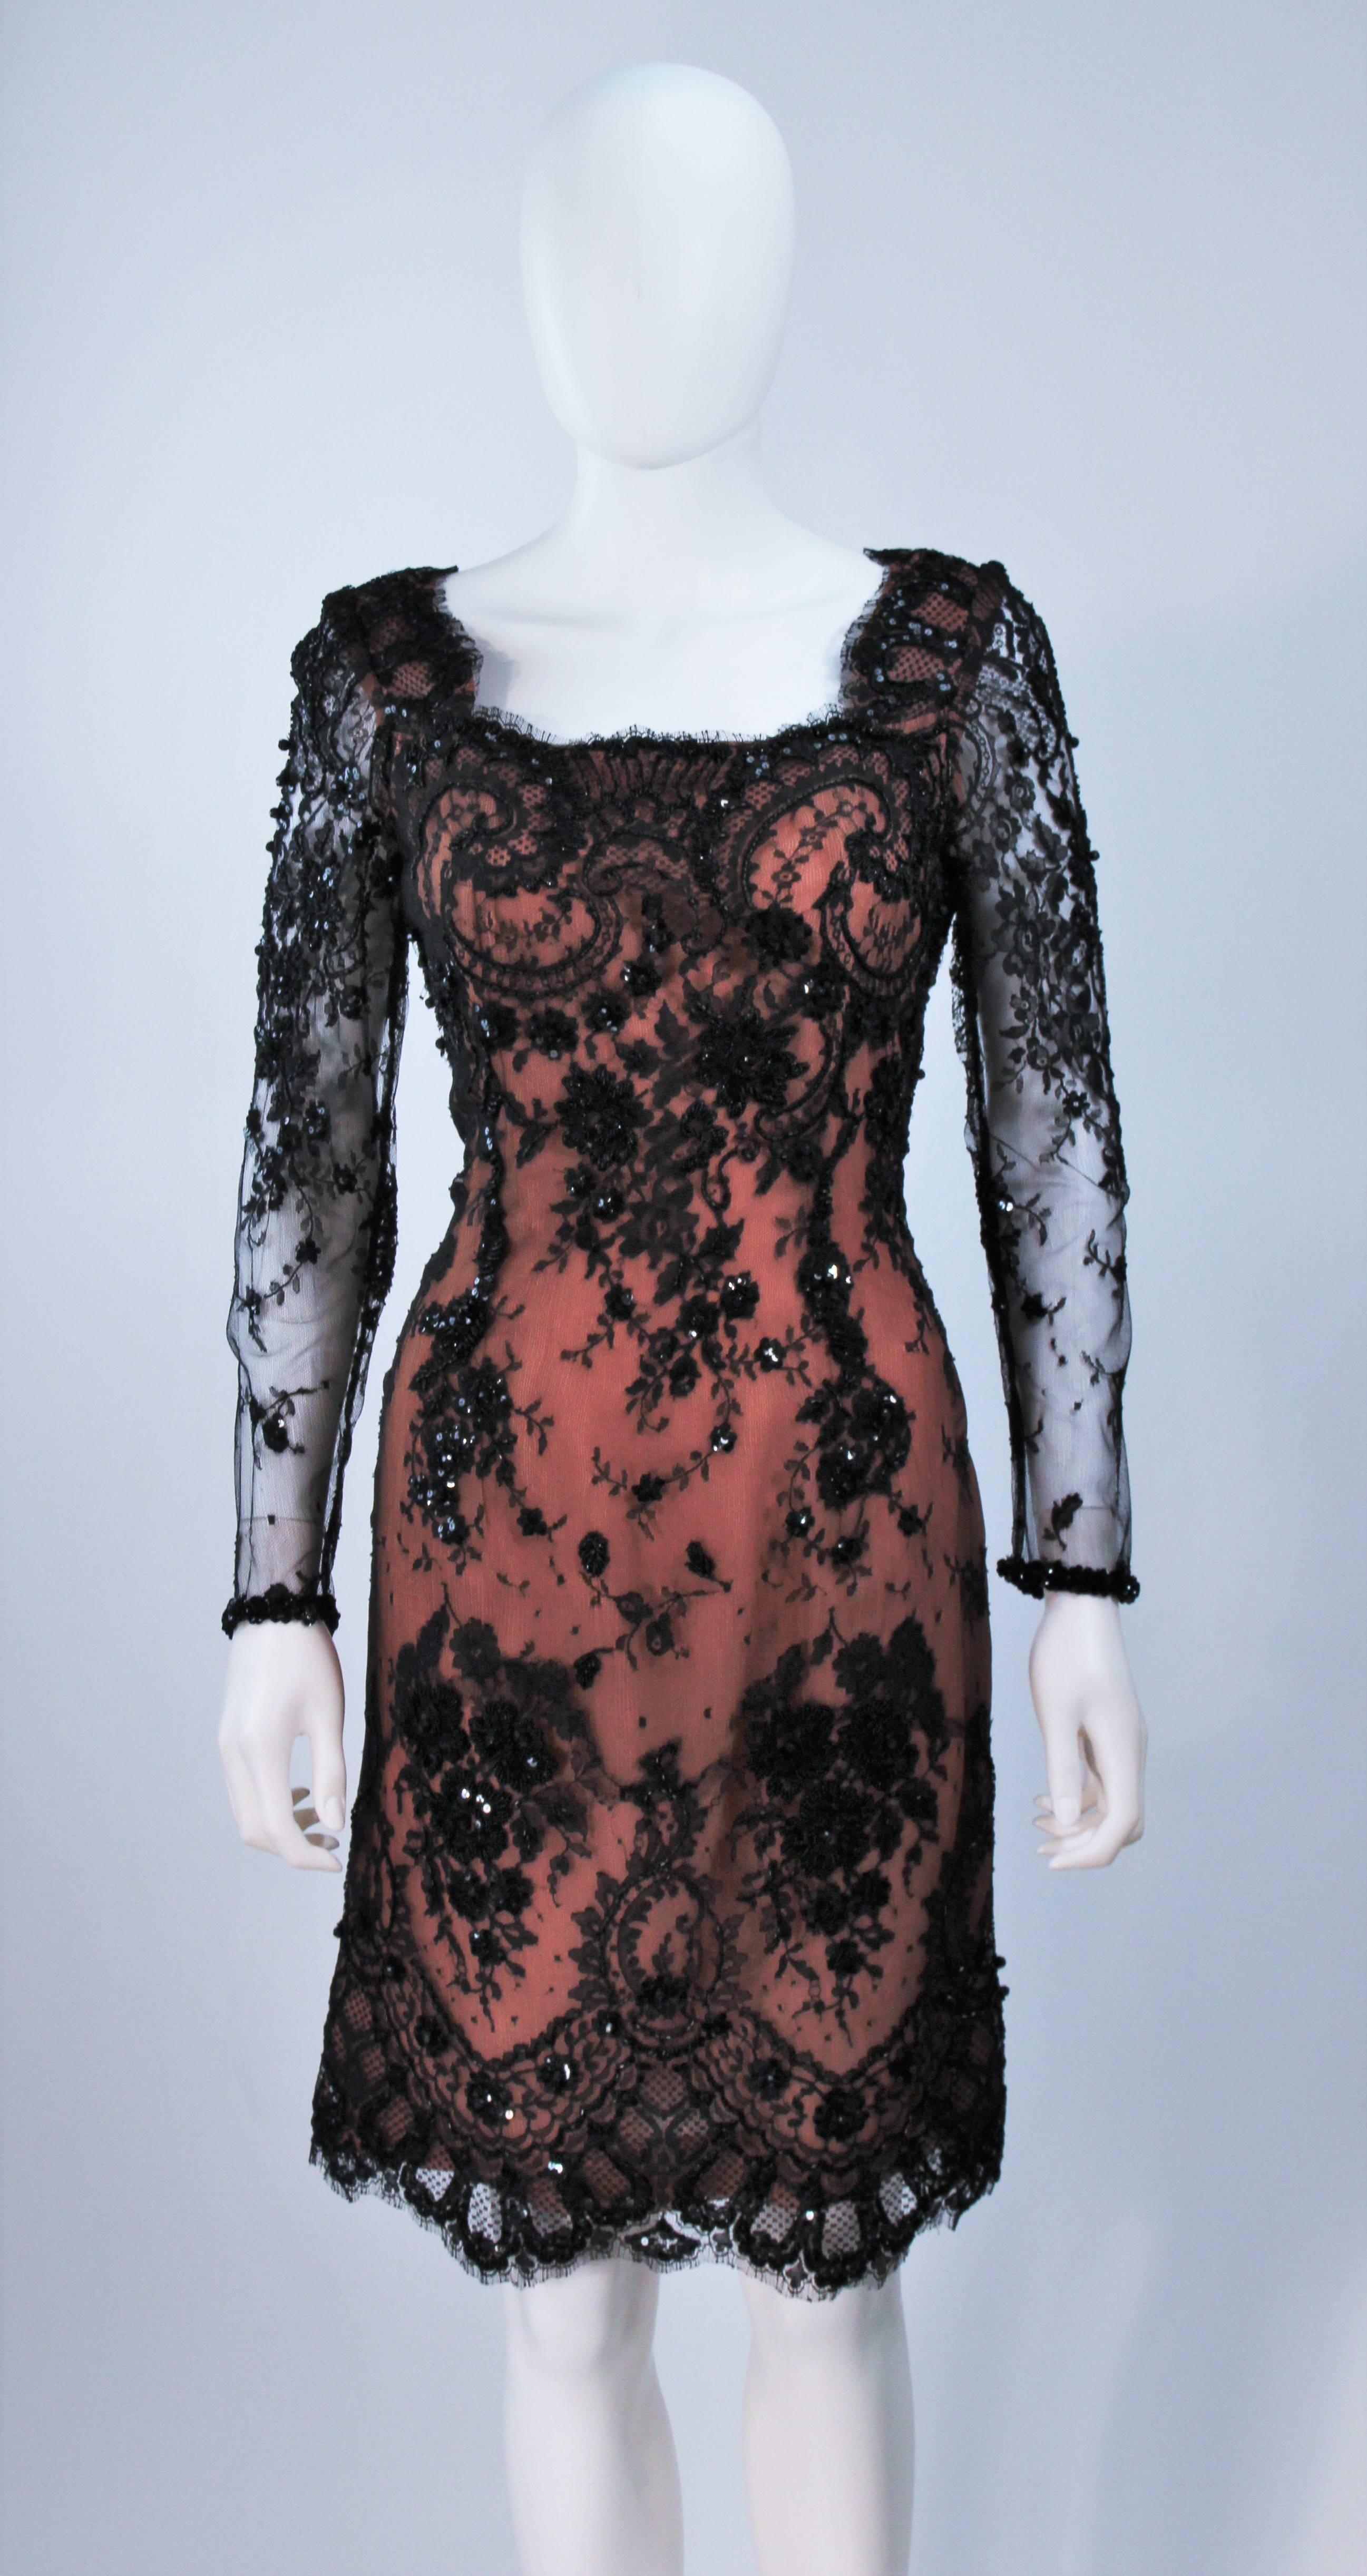 FE ZANDI Black Lace Embellished Cocktail Dress Size 8 In Excellent Condition For Sale In Los Angeles, CA